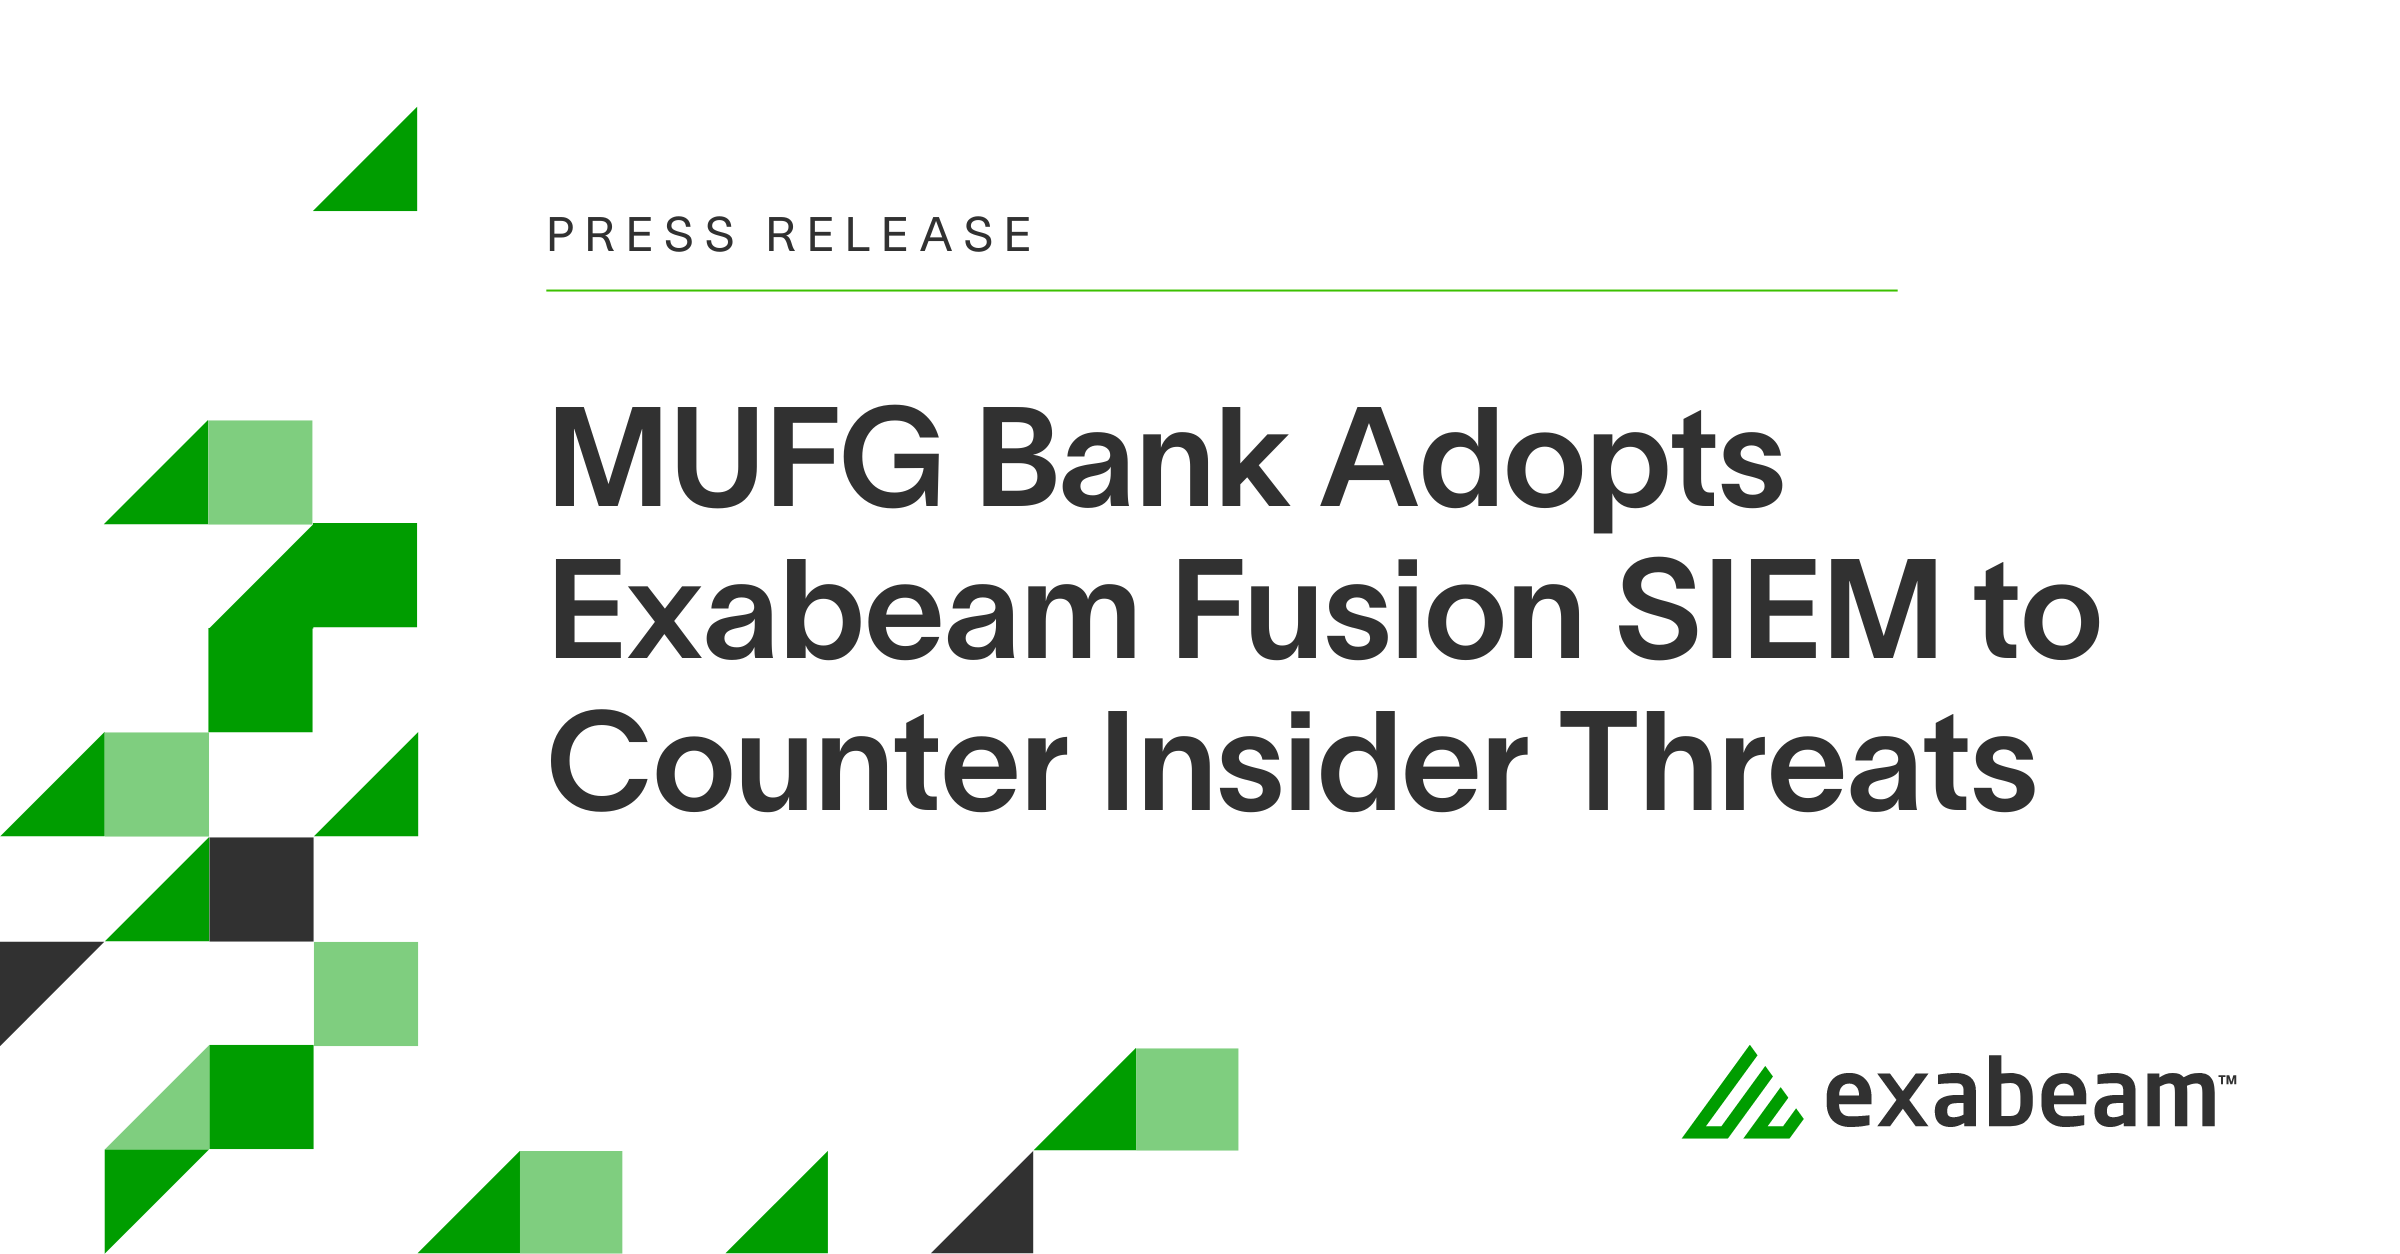 MUFG Bank Adopts Exabeam Fusion SIEM to Counter Insider Threats